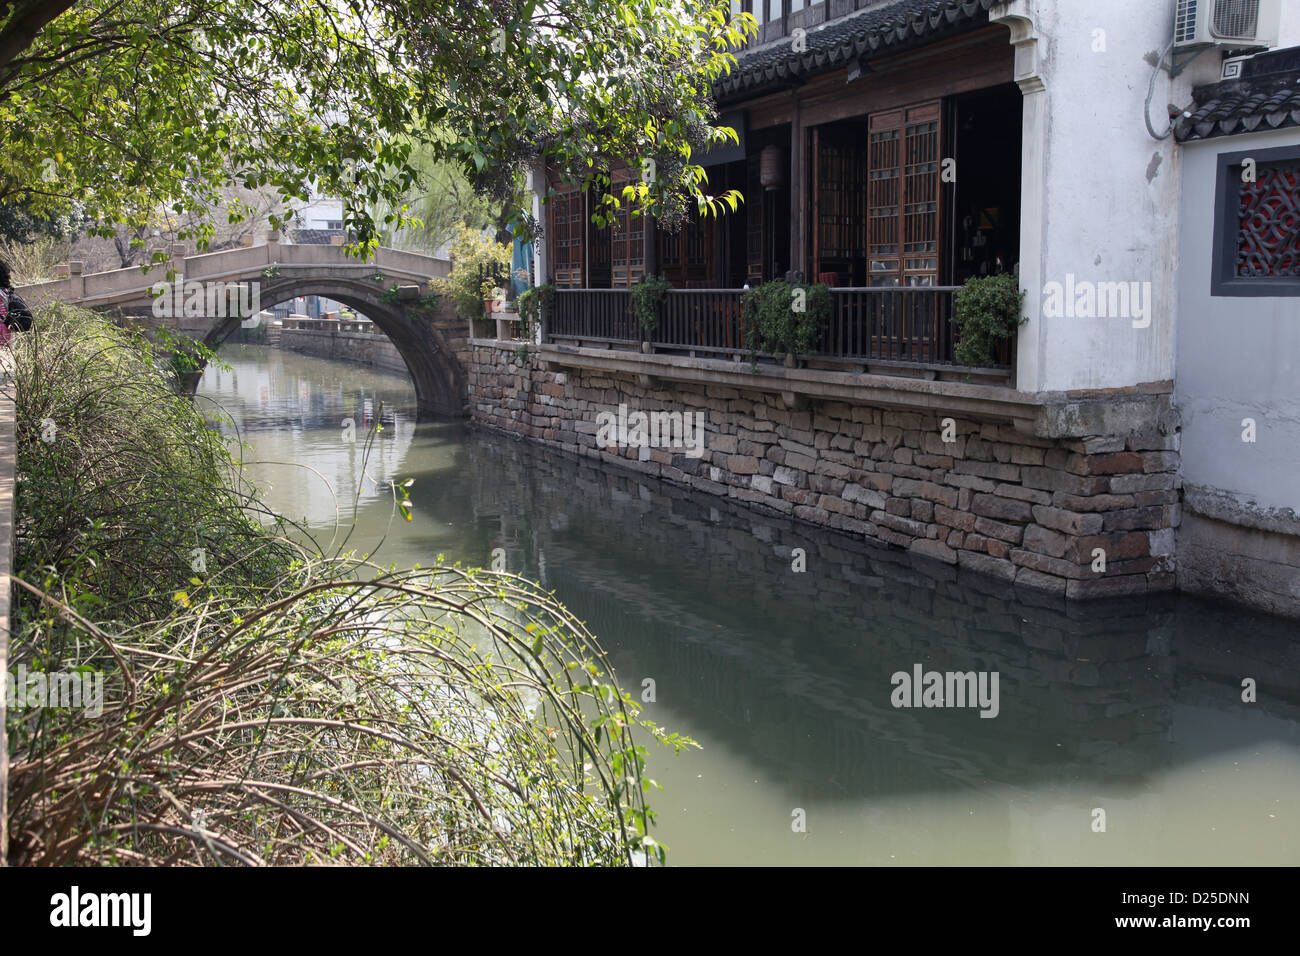 It's a photo of few old houses along a river in a Chinese city in China ...